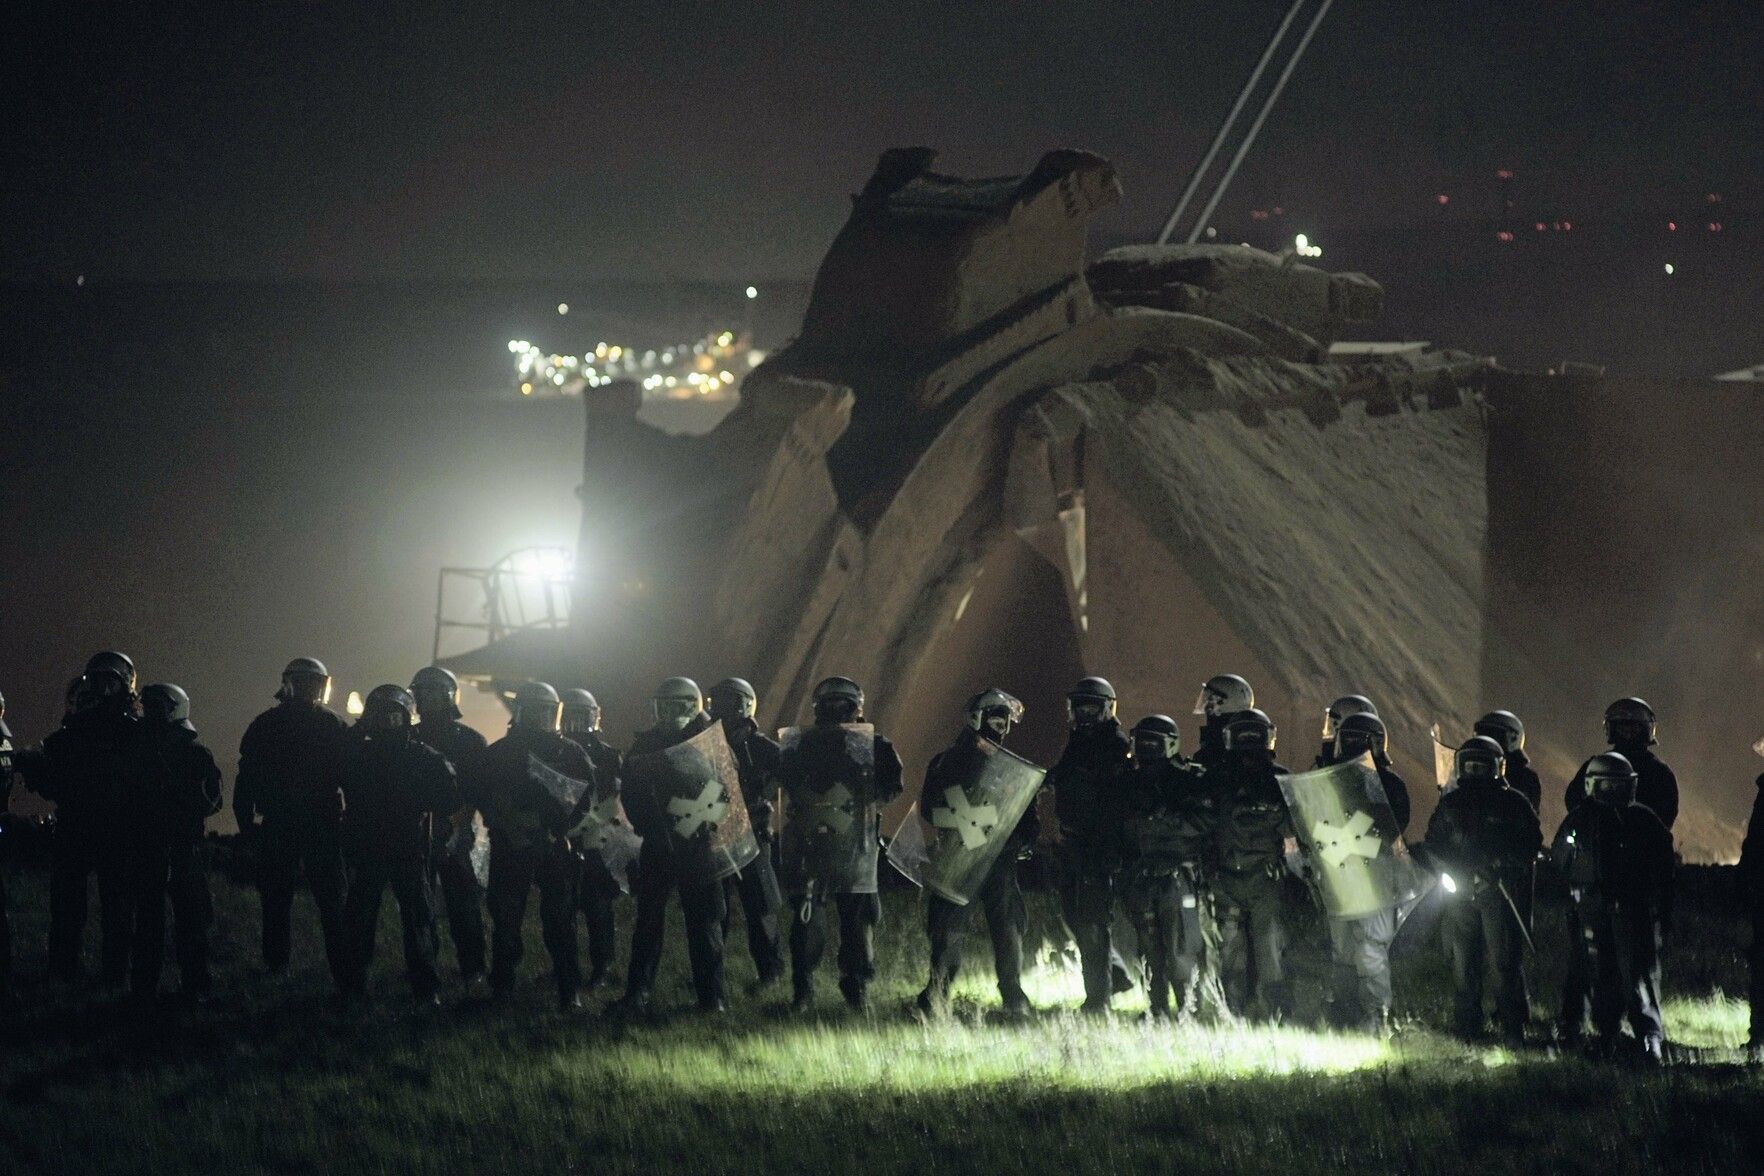 German riot police in full armour stand in front of a coal mining machine at night, lit by floodlights